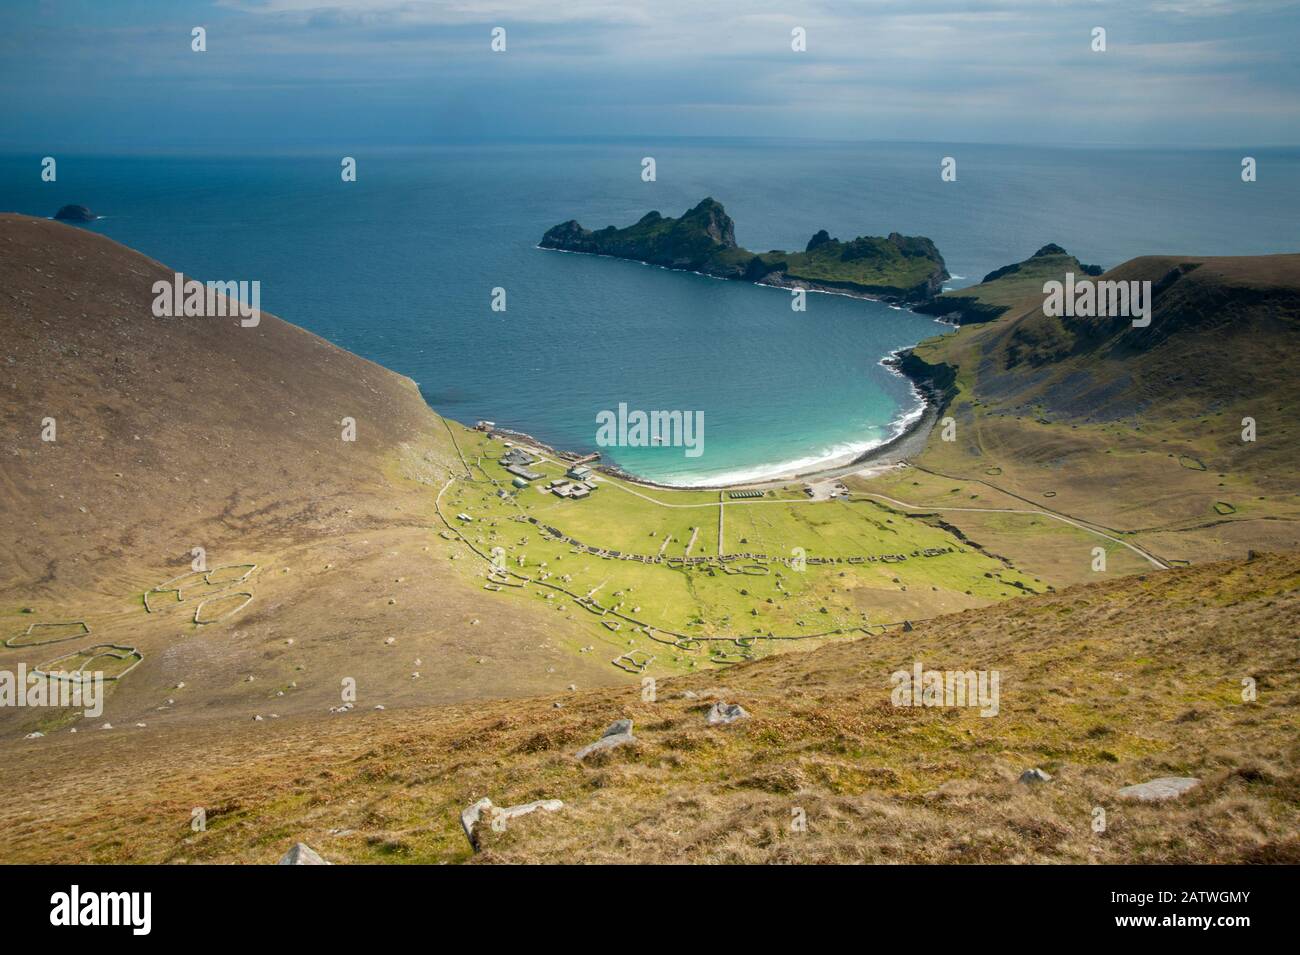 Village Bay on St Kilda and the old houses that formed the village, Scotland, UK, May. Stock Photo